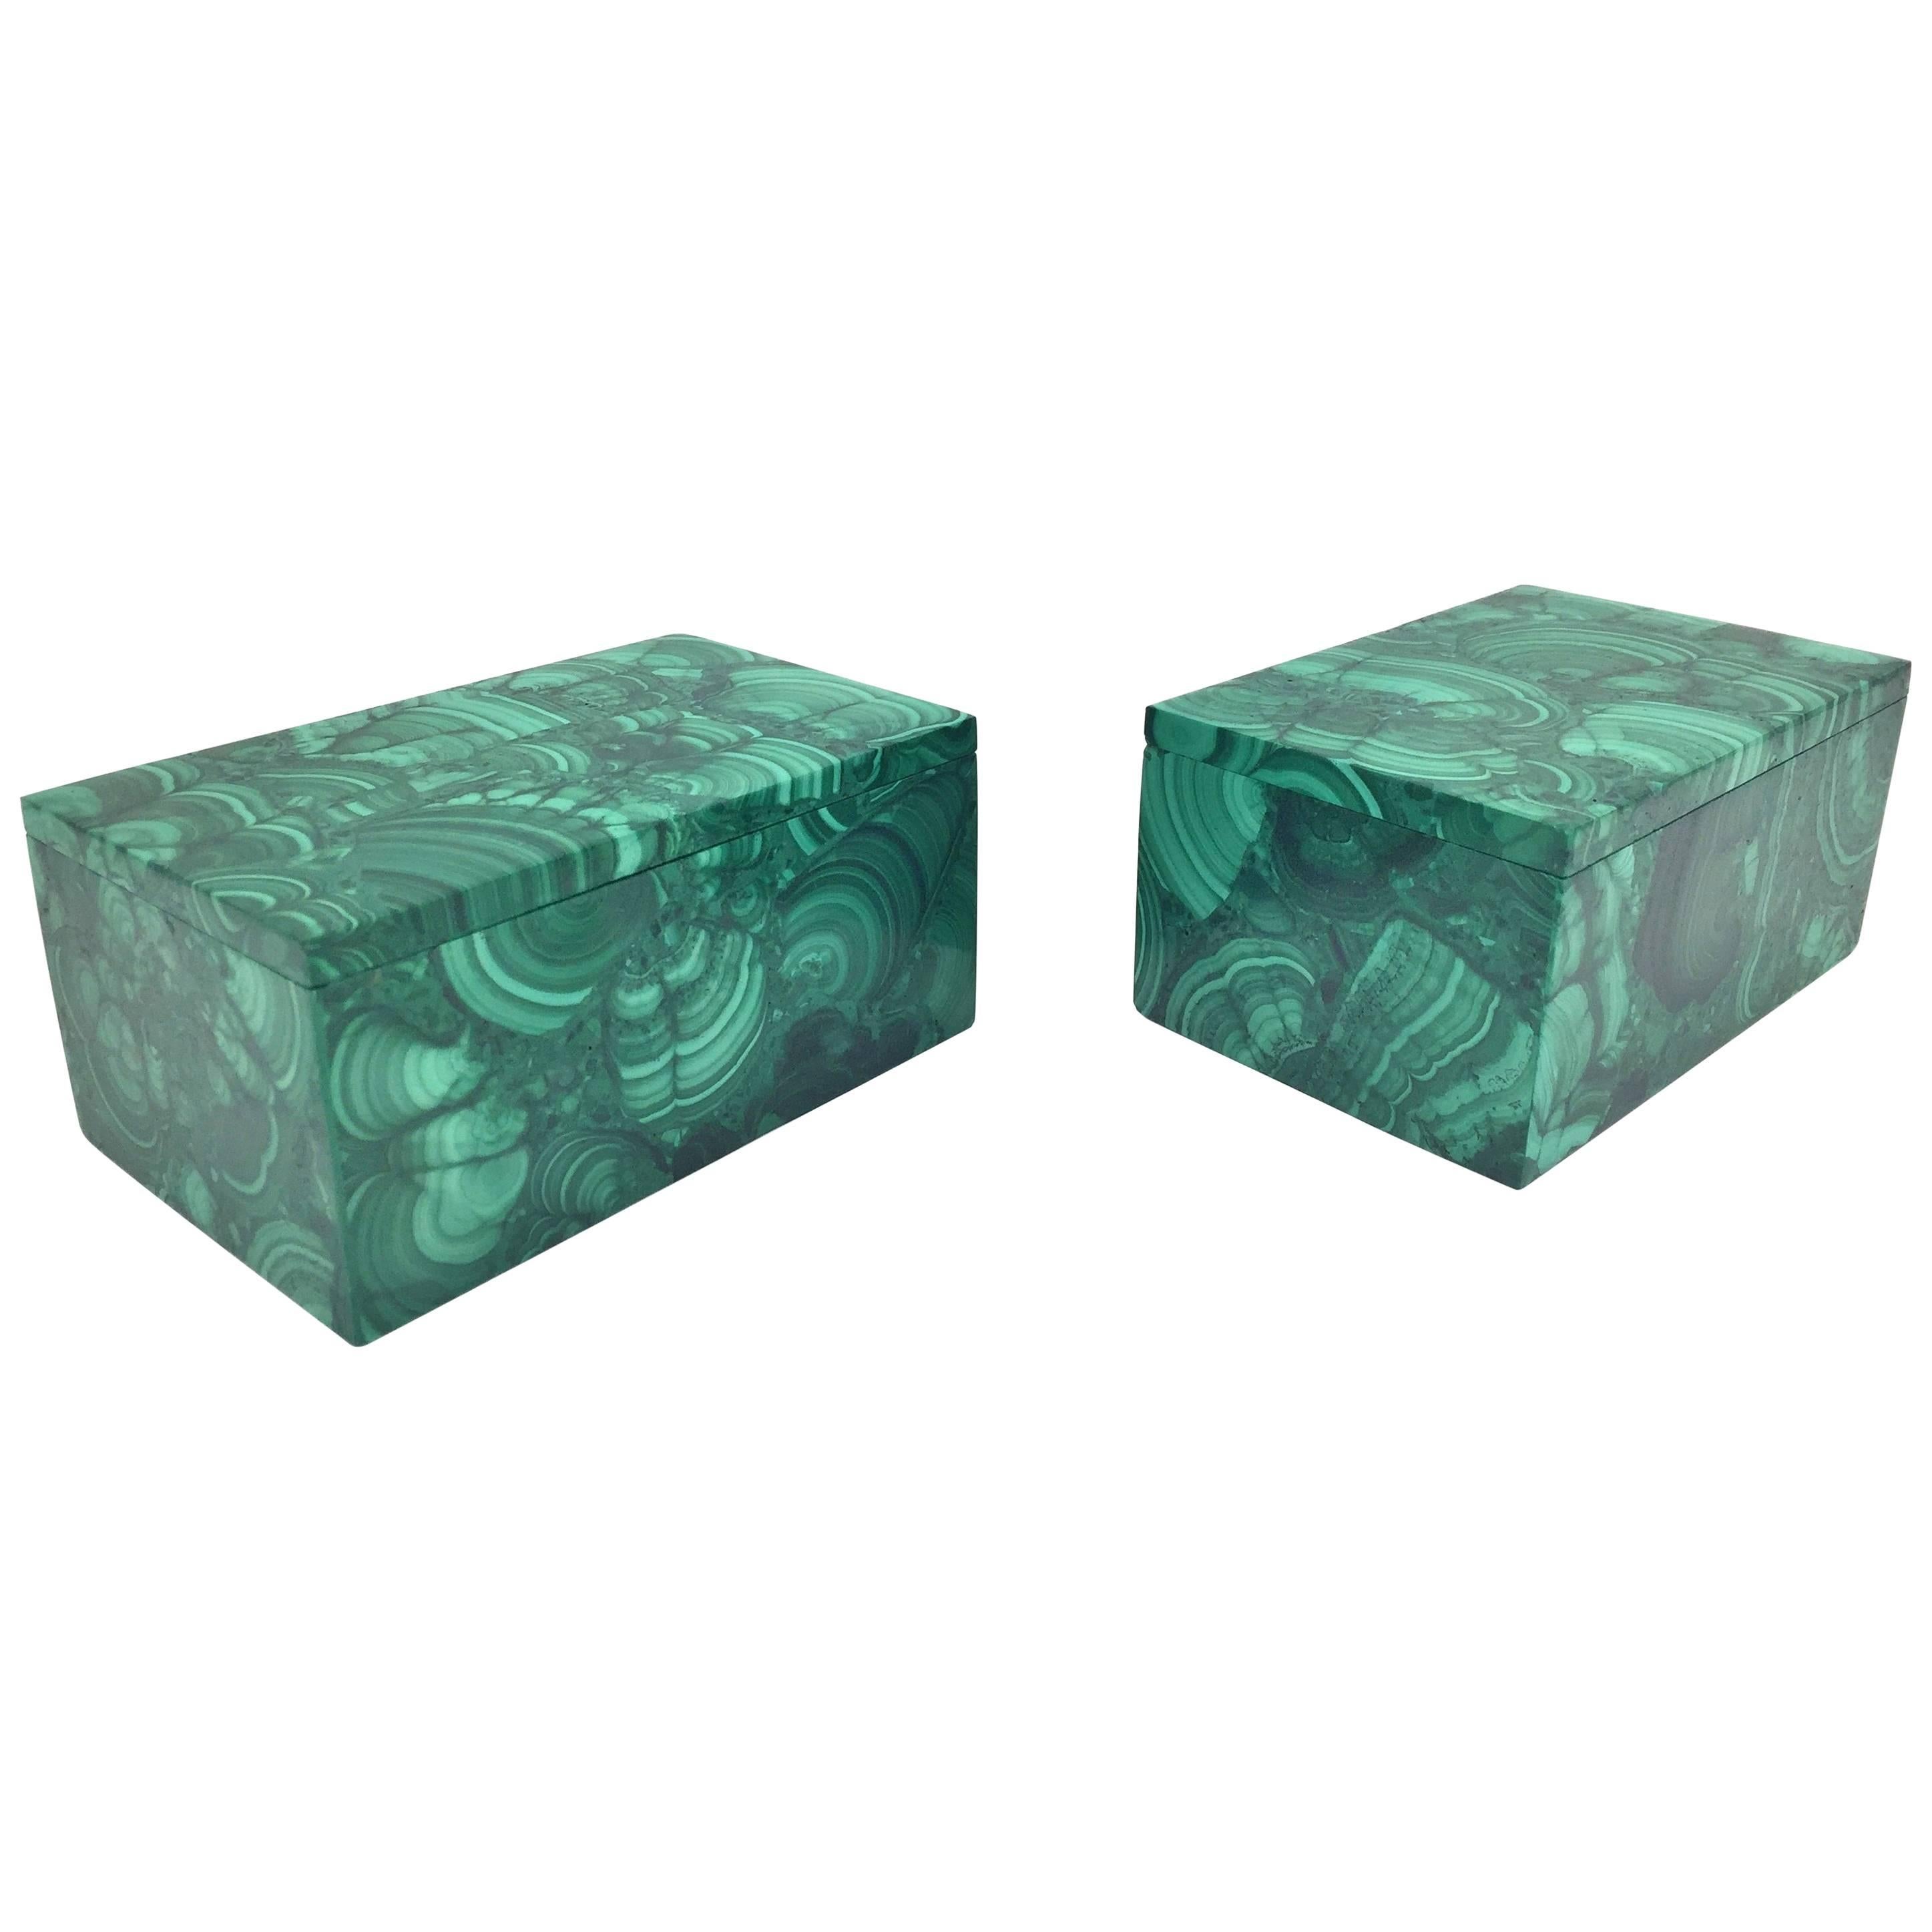 Pair of Natural Malachite Boxes, Handcrafted Jewelry Boxes